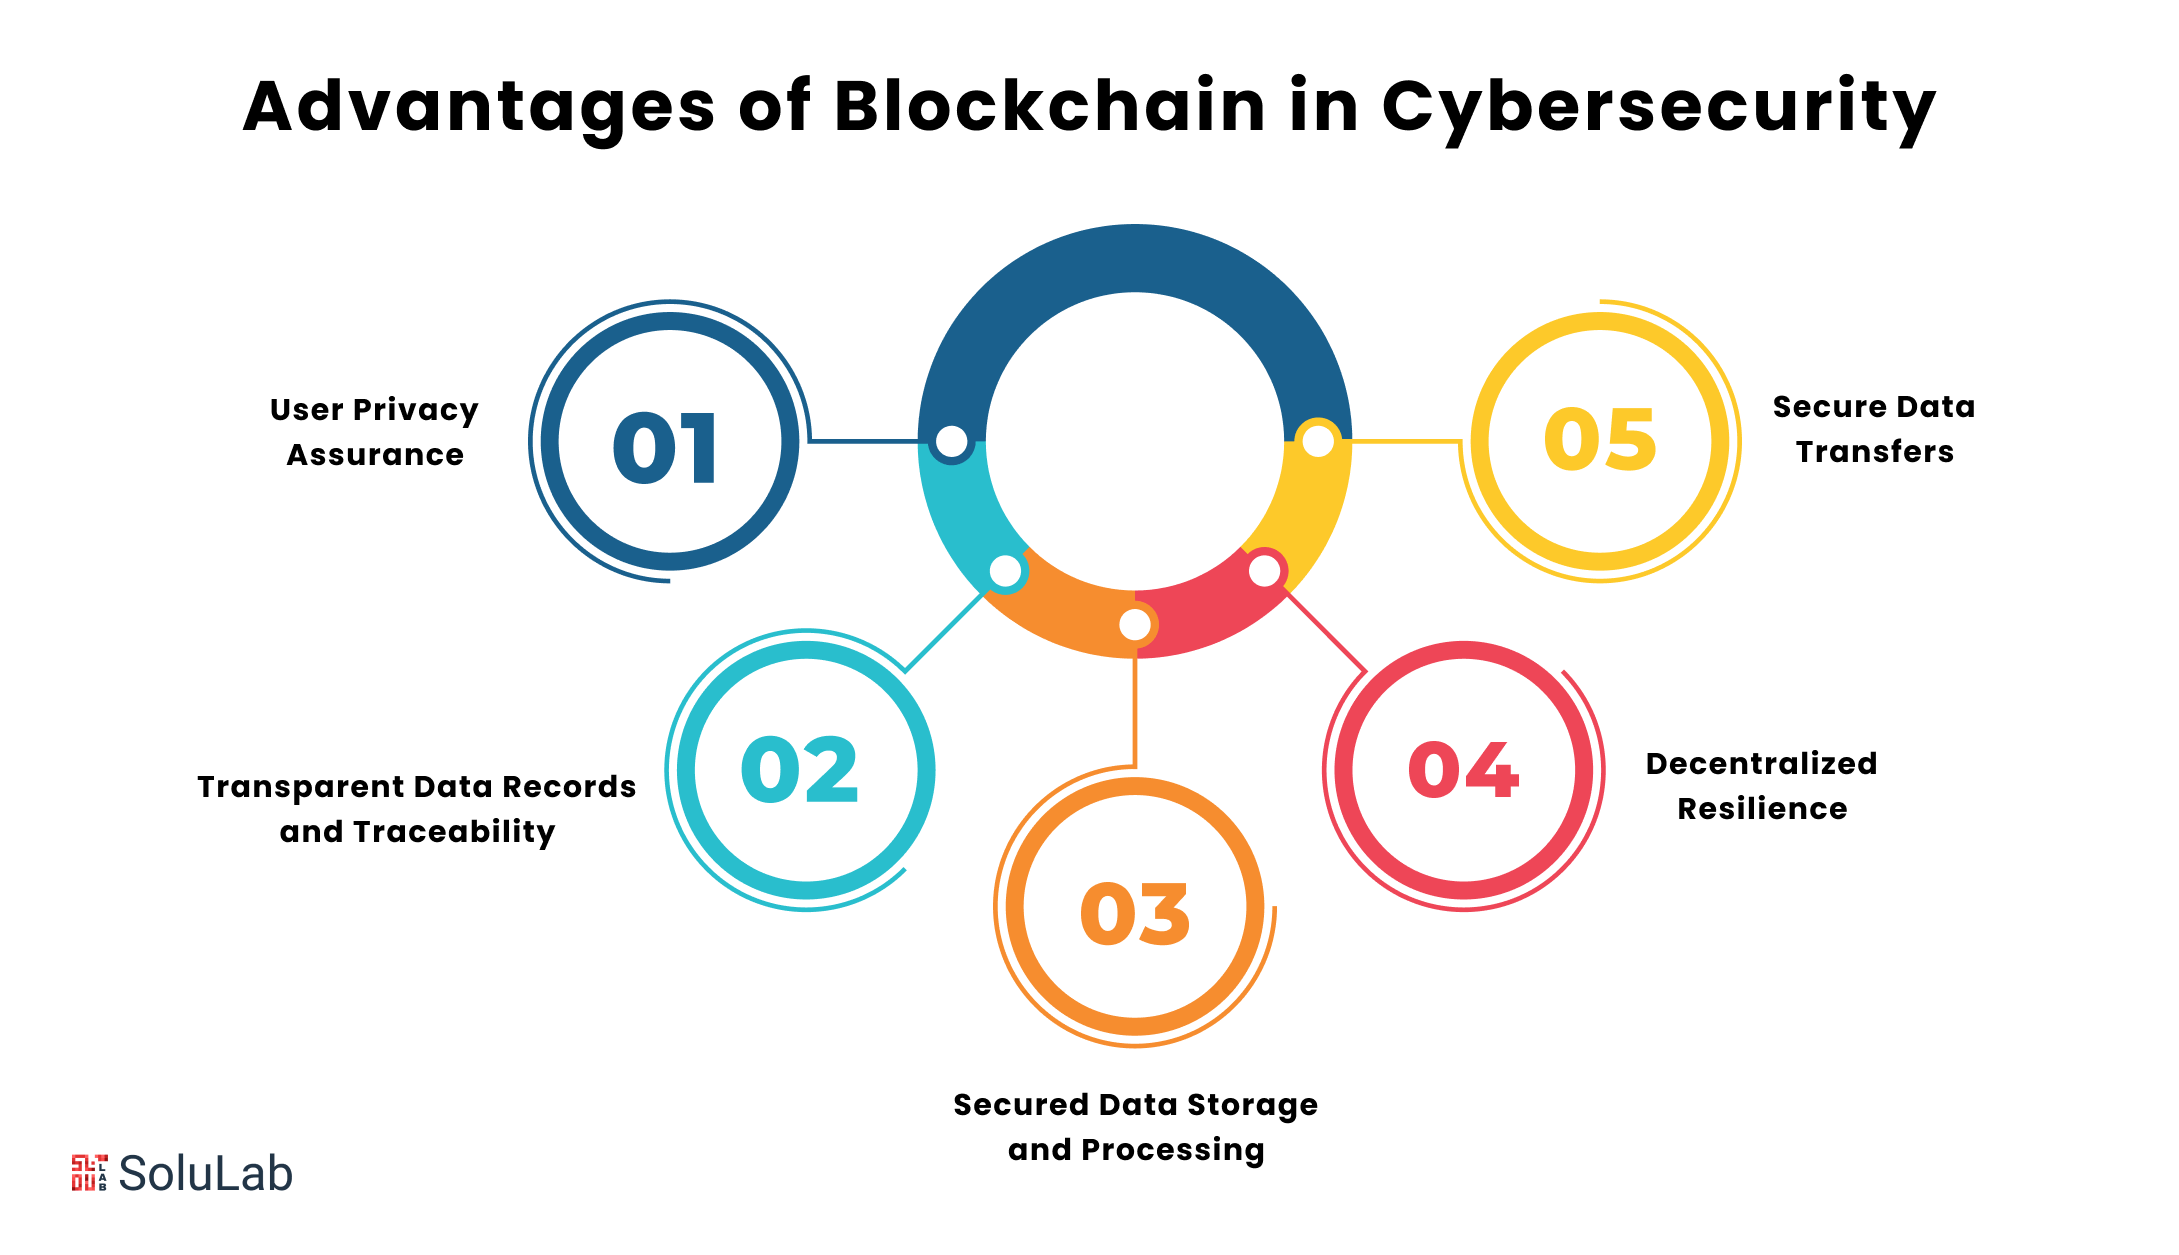 Advantages of Blockchain in Cybersecurity